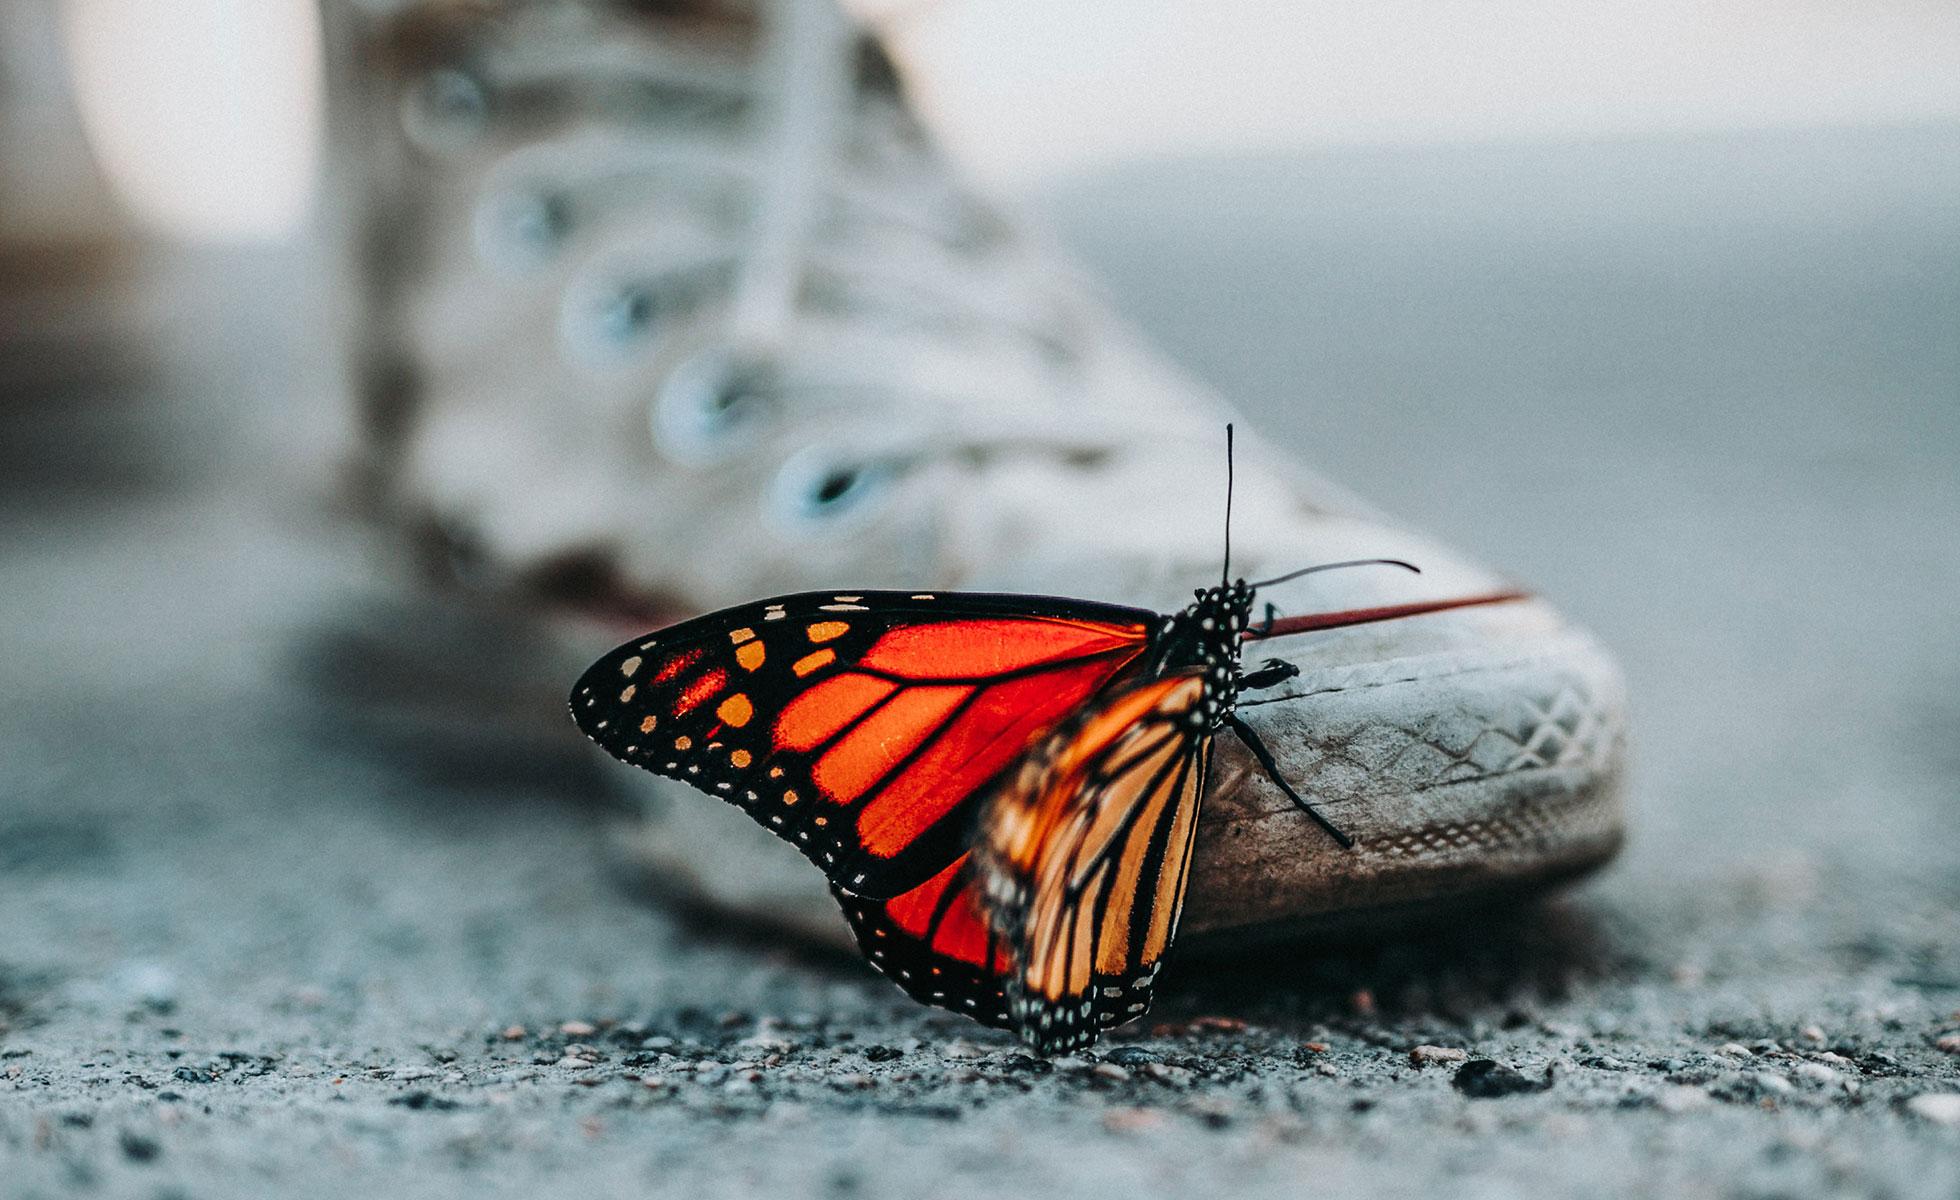 A monarch butterfly climbs onto a person's shoe